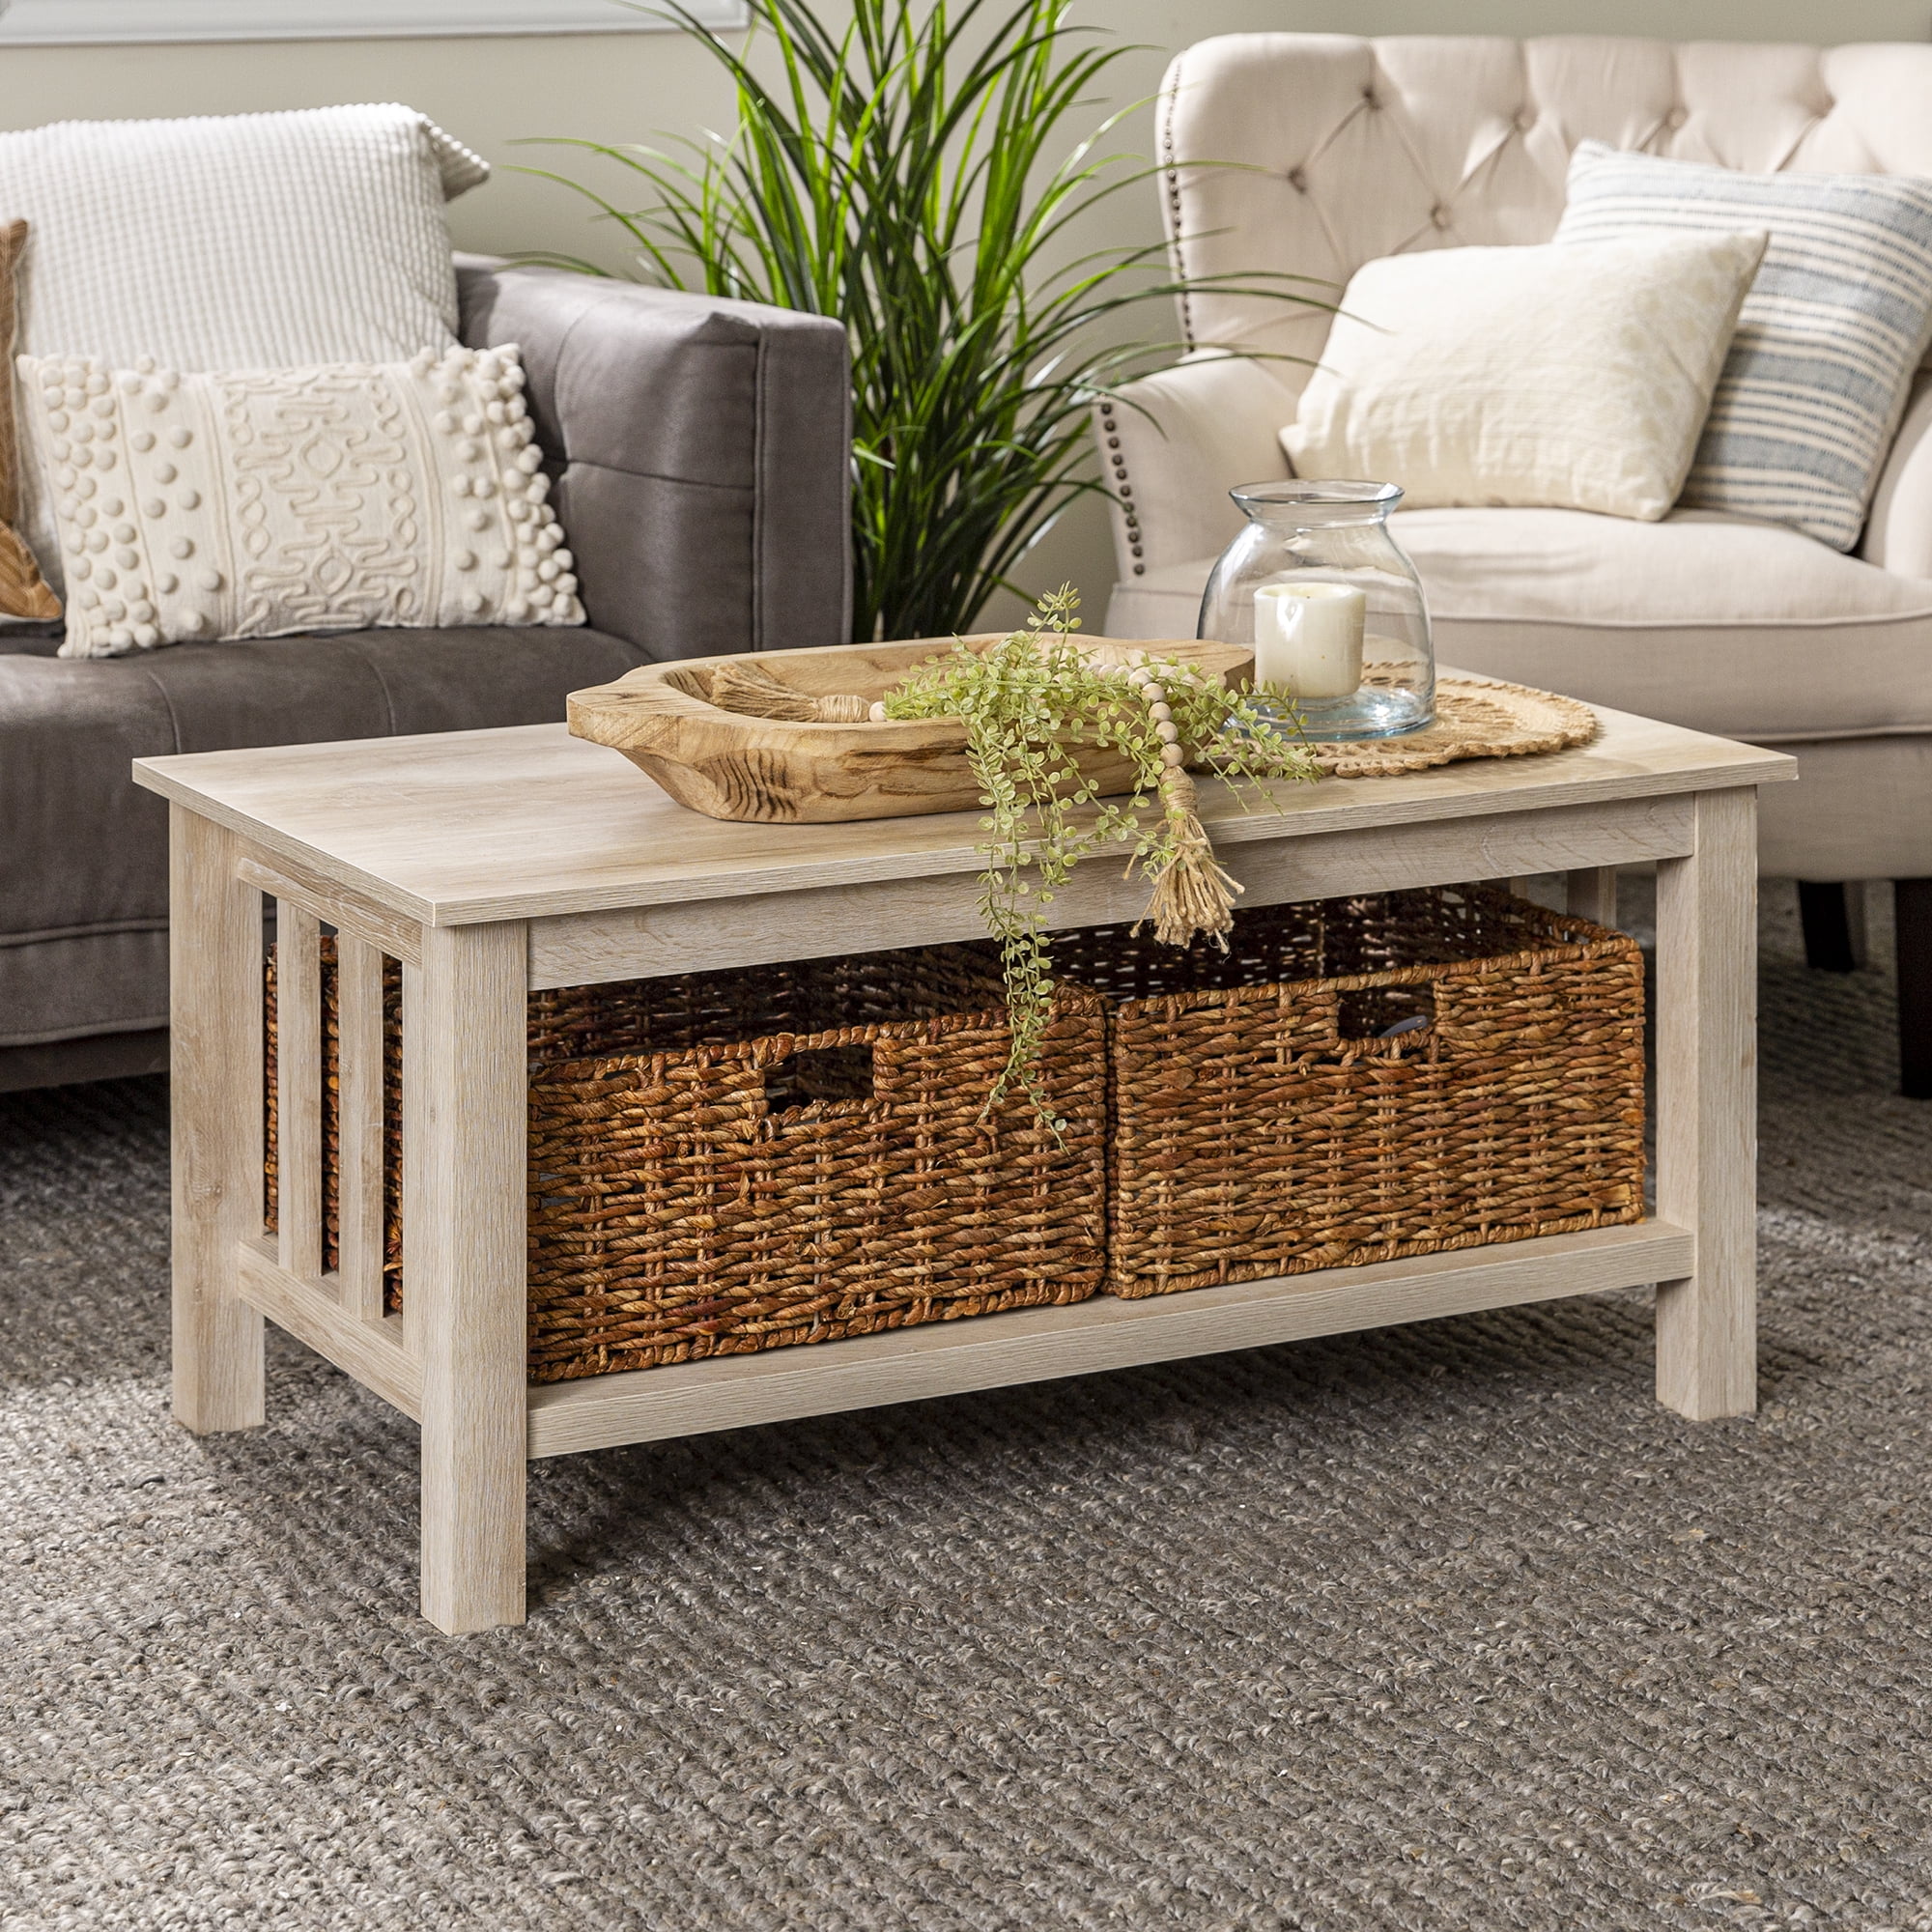 Woven Paths Traditional Storage Coffee Table with Bins, White Oak